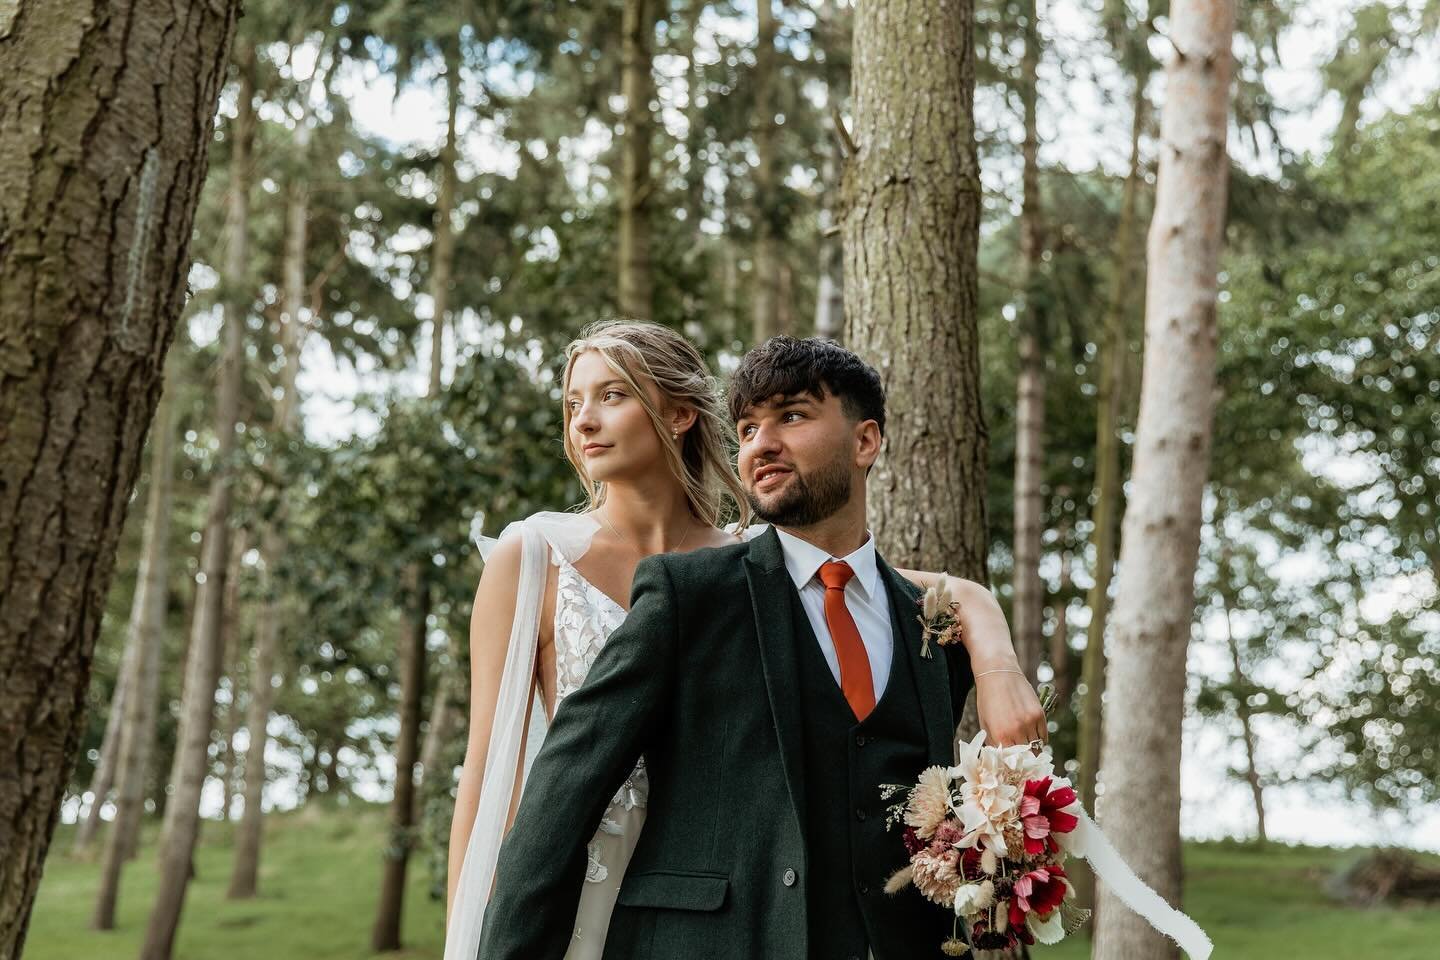 I really enjoyed Jas &amp; Jordys wedding shoot In the woods 😍. Allocating more time for your couples shoot means you won&rsquo;t feel rushed and you can have photos in multiple locations which adds more variety!

#kiiroandkiwi #weddingphotography #